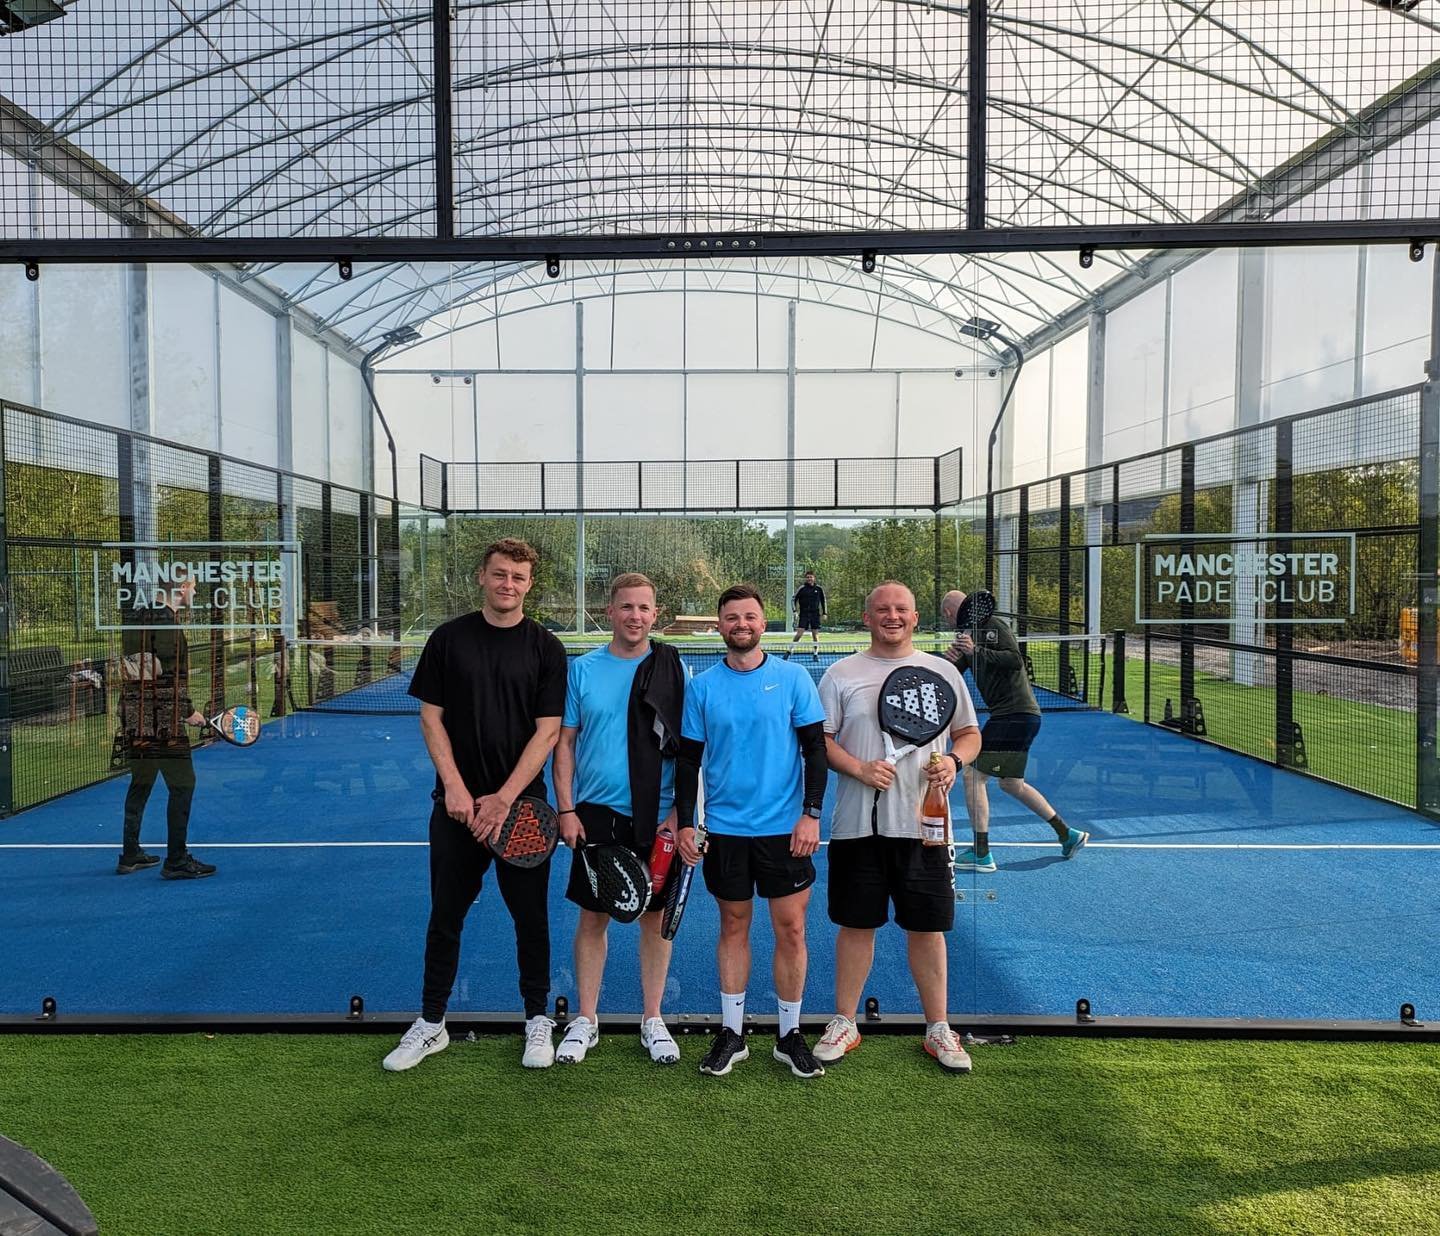 Game On! Our covered Centre Court is open for action 🎉🎾

We&rsquo;ve officially welcomed the first players onto our covered Centre Court (which is fast becoming known as &lsquo;the Cathedral&rsquo;)!

Want to try it out? 
We&rsquo;re almost fully b